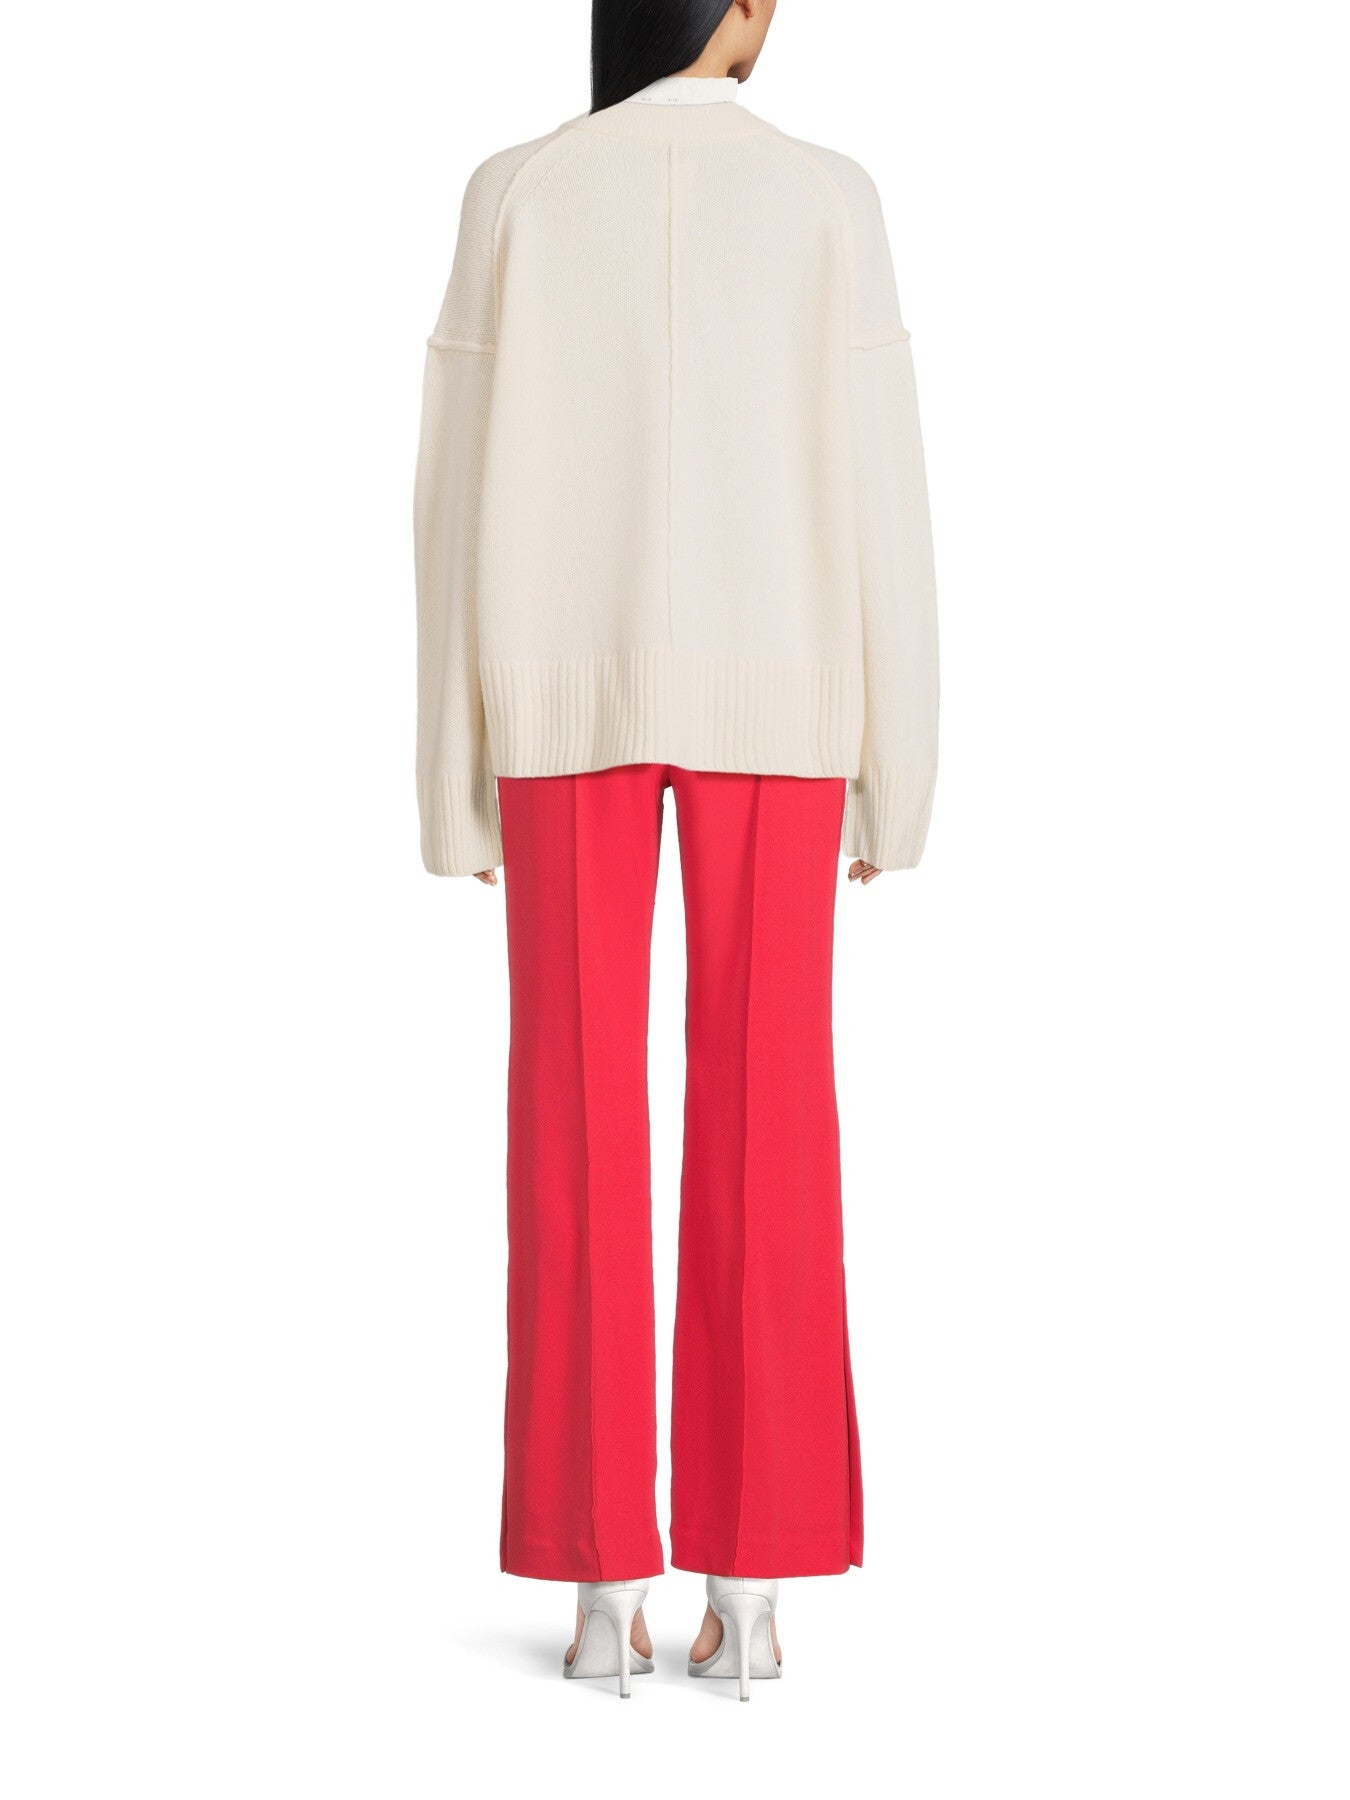 Day Birger Wagner Trousers